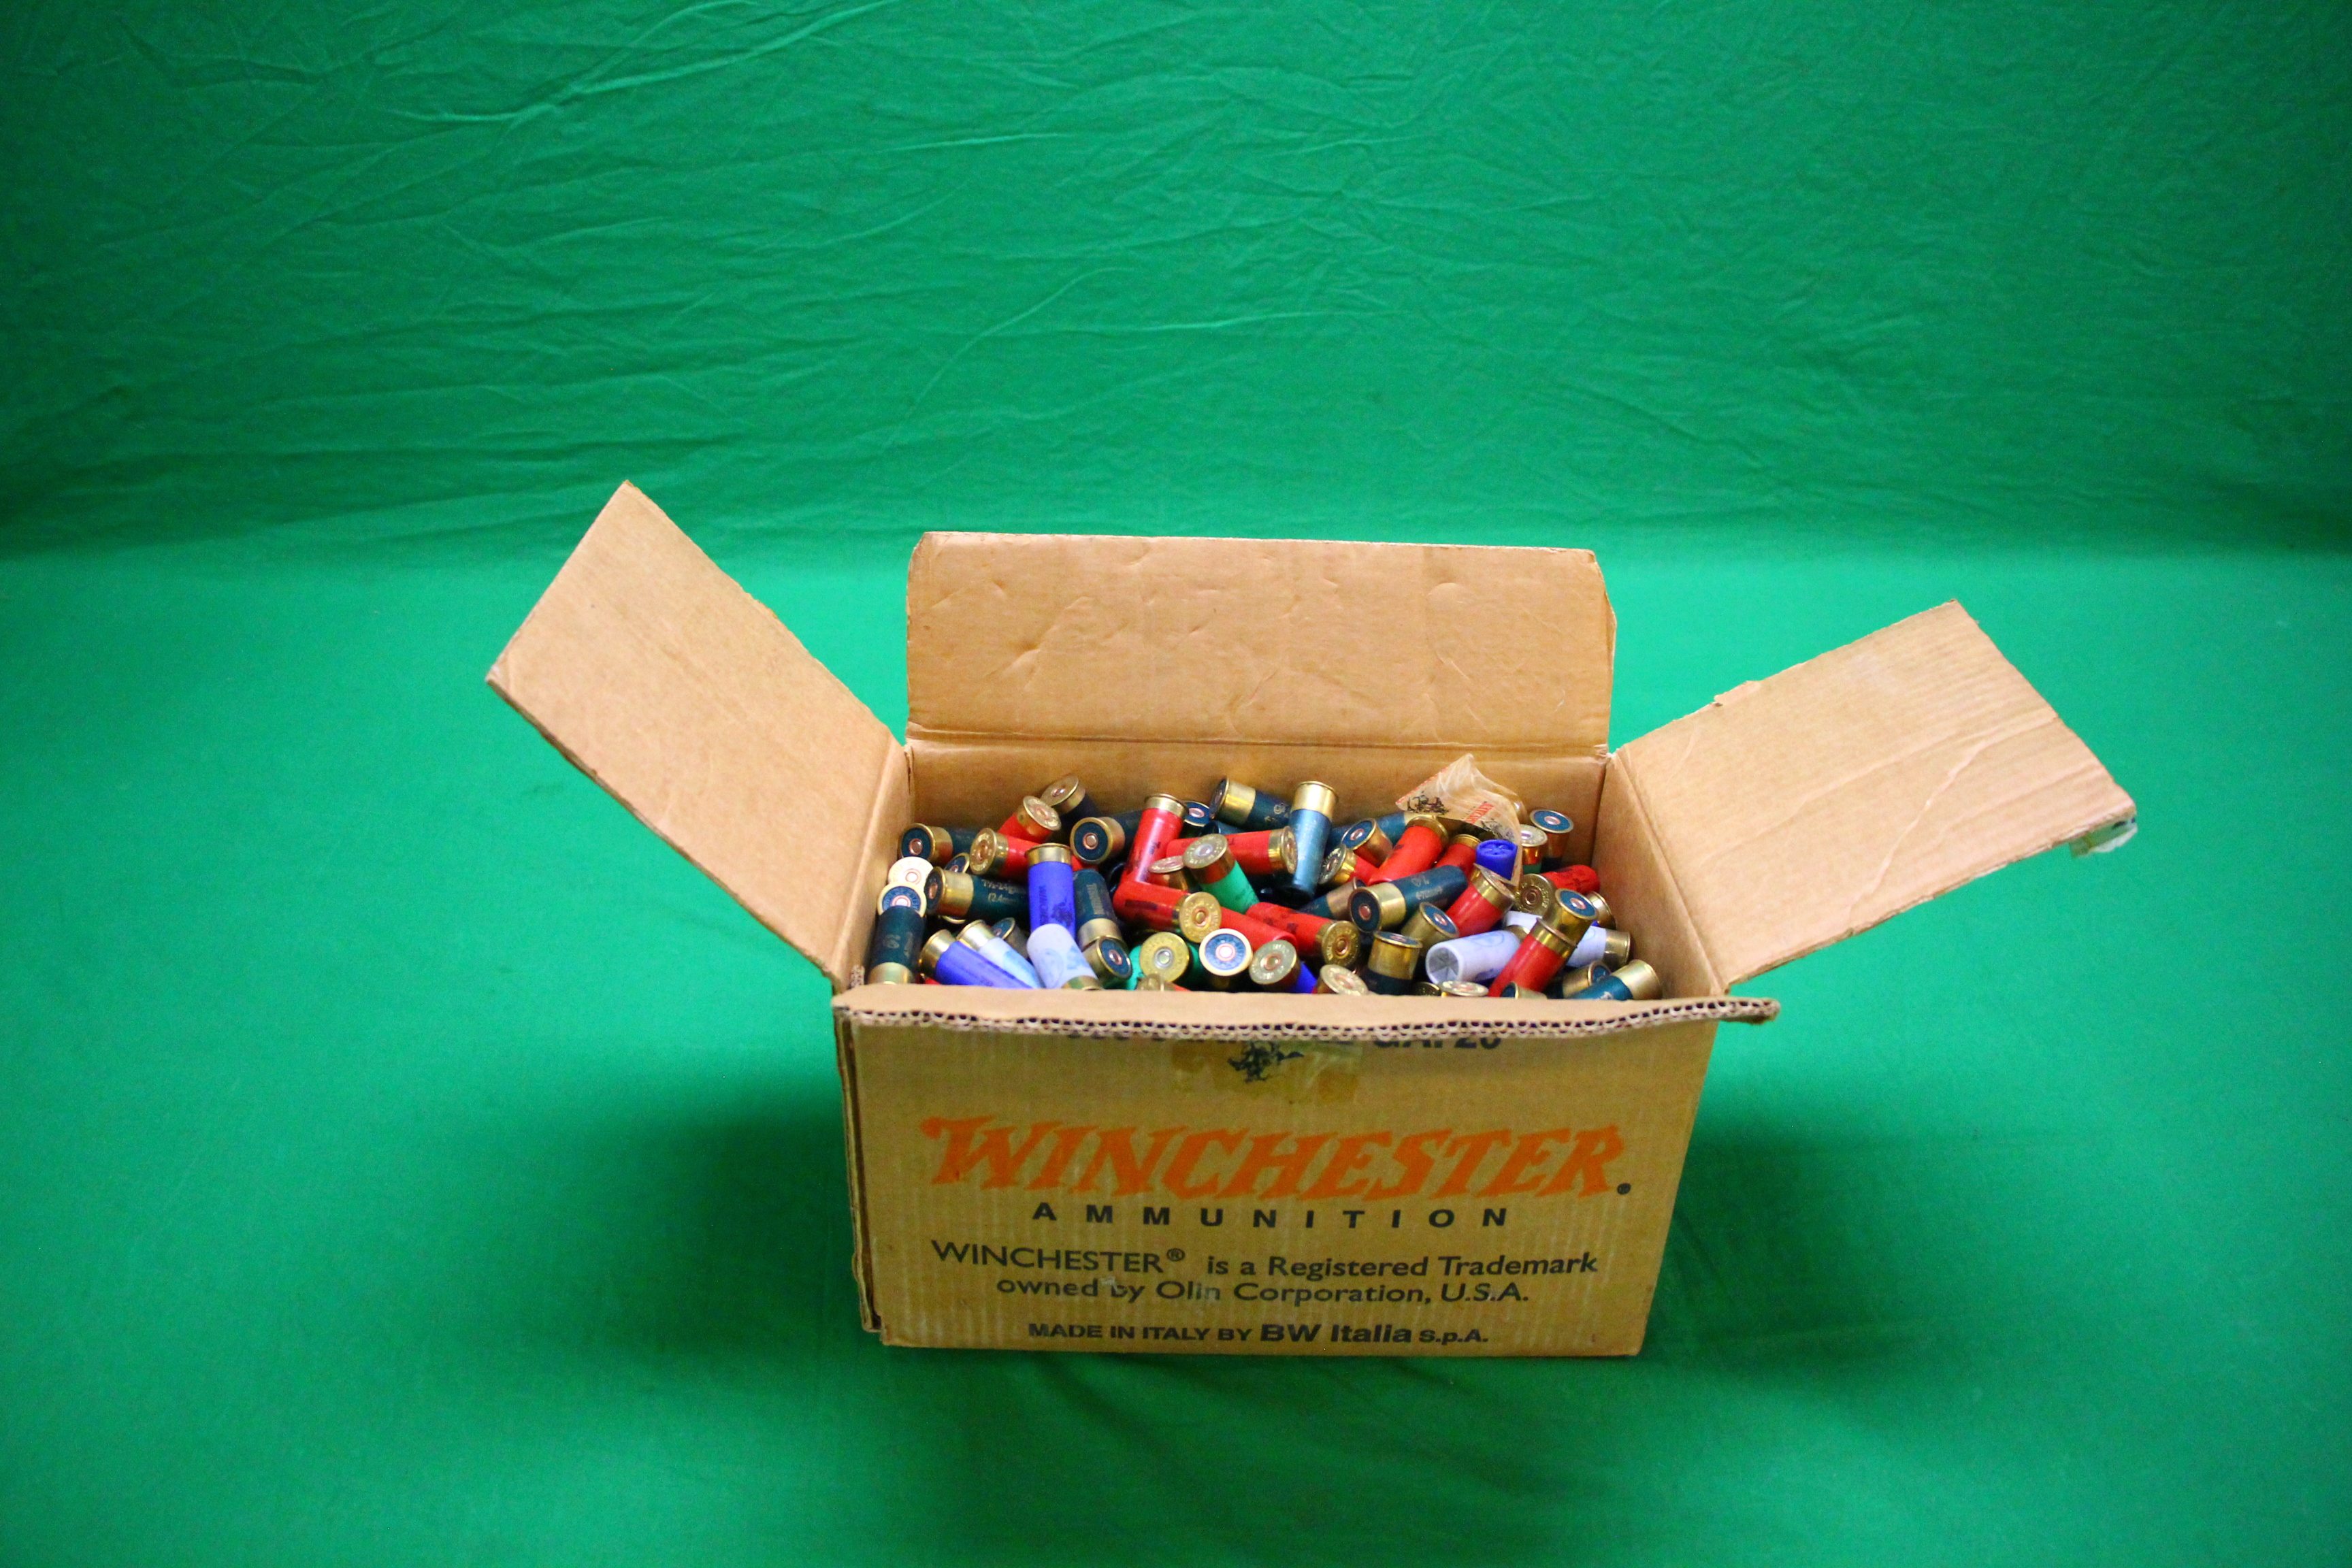 BOX CONTAINING 350+ MIXED LOOSE 12 GAUGE SHOTGUN CARTRIDGES - (TO BE COLLECTED IN PERSON BY LICENCE - Image 2 of 6